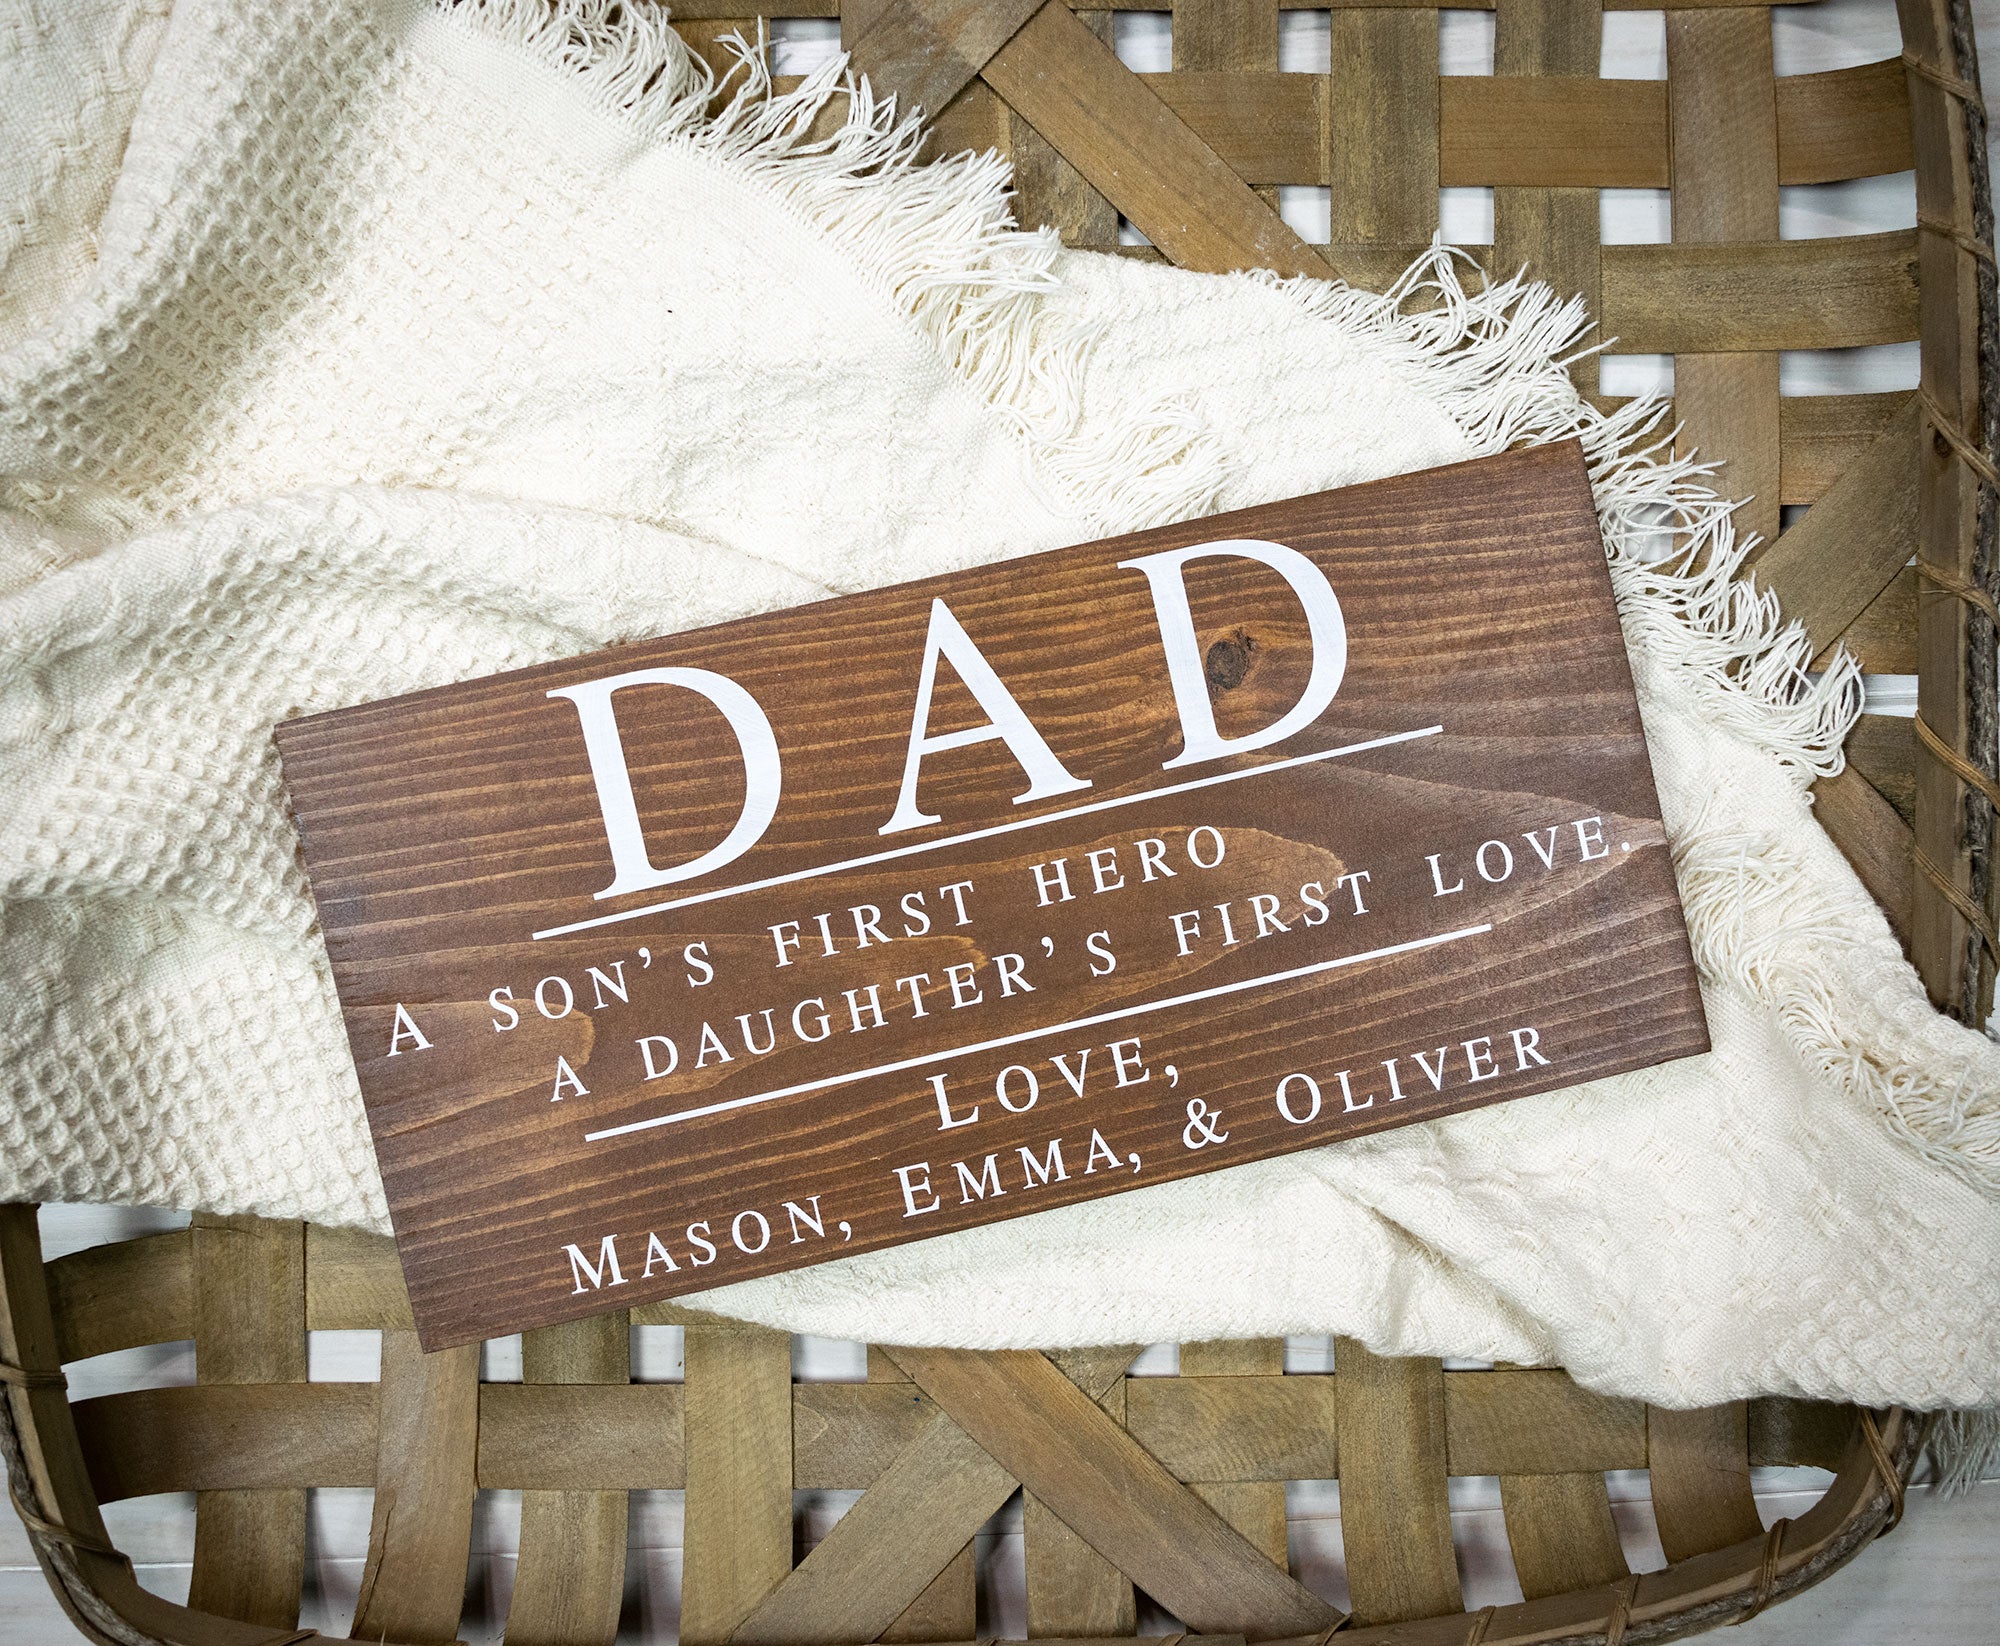  Fathers Day Gift for Dad, Personalized Dad Sign with